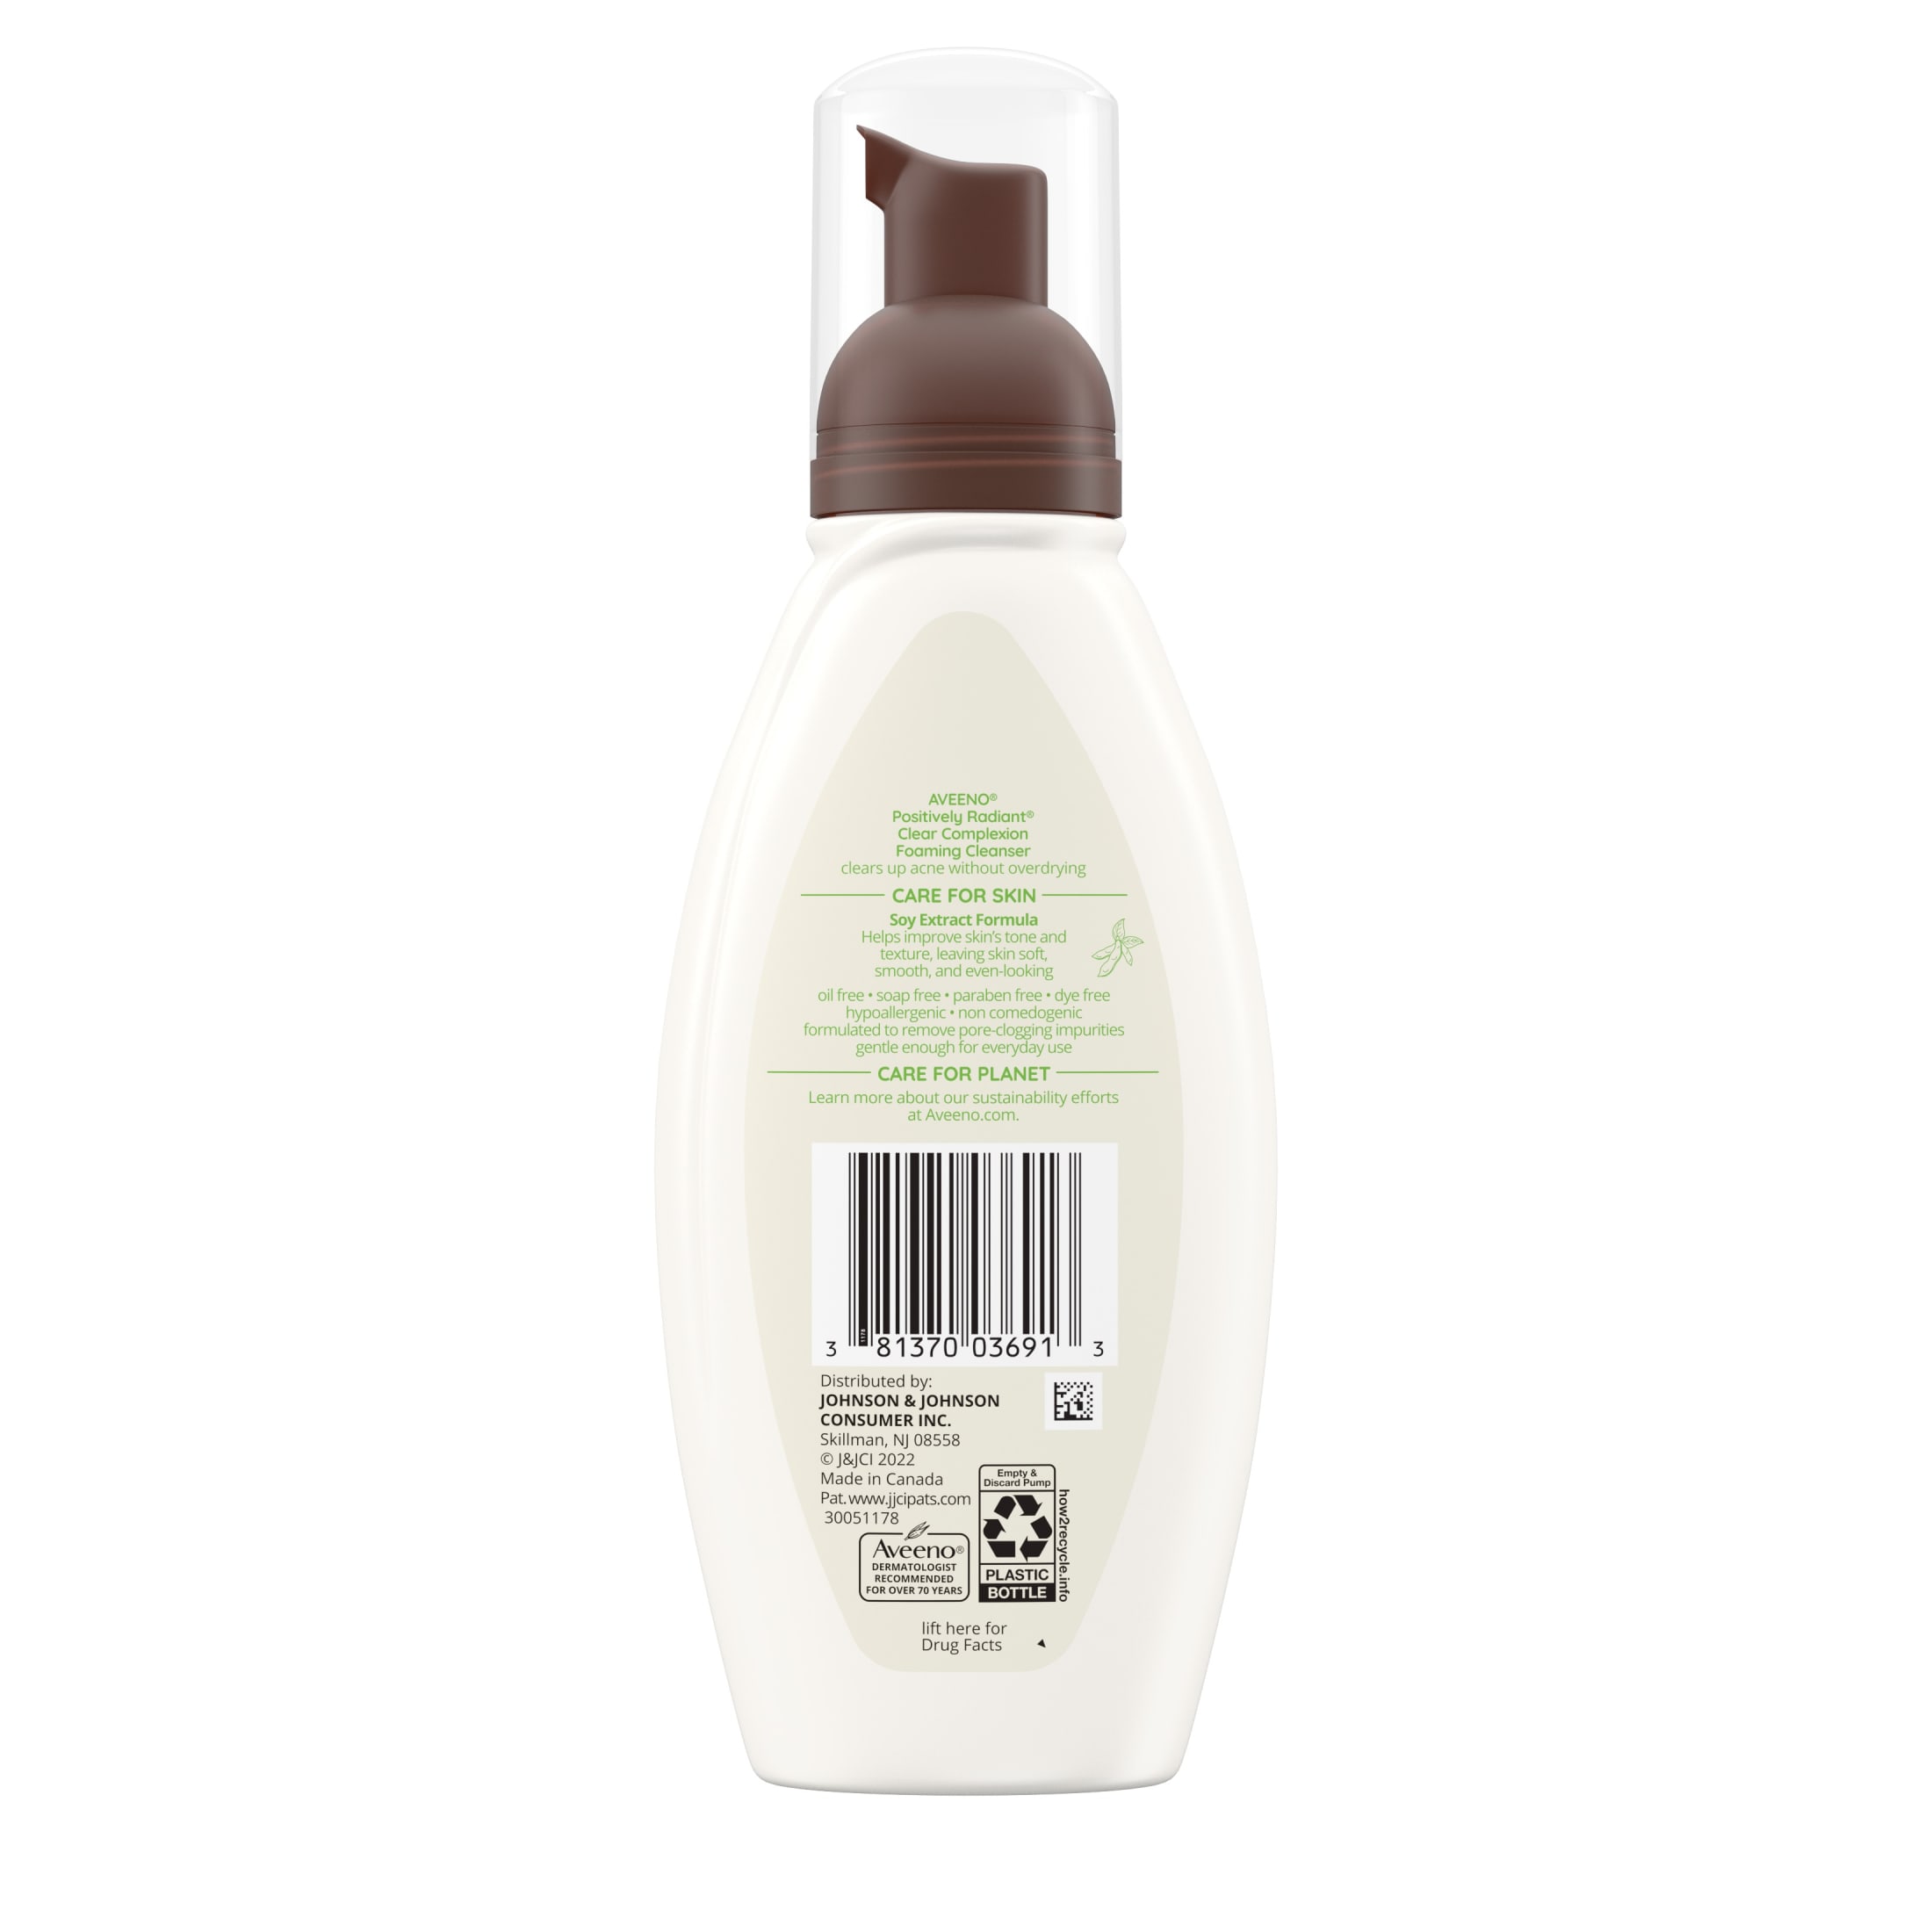 Aveeno Clear Complexion Foaming Facial Cleanser, Oil-Free Acne Face Wash, 6 fl. oz - image 9 of 9